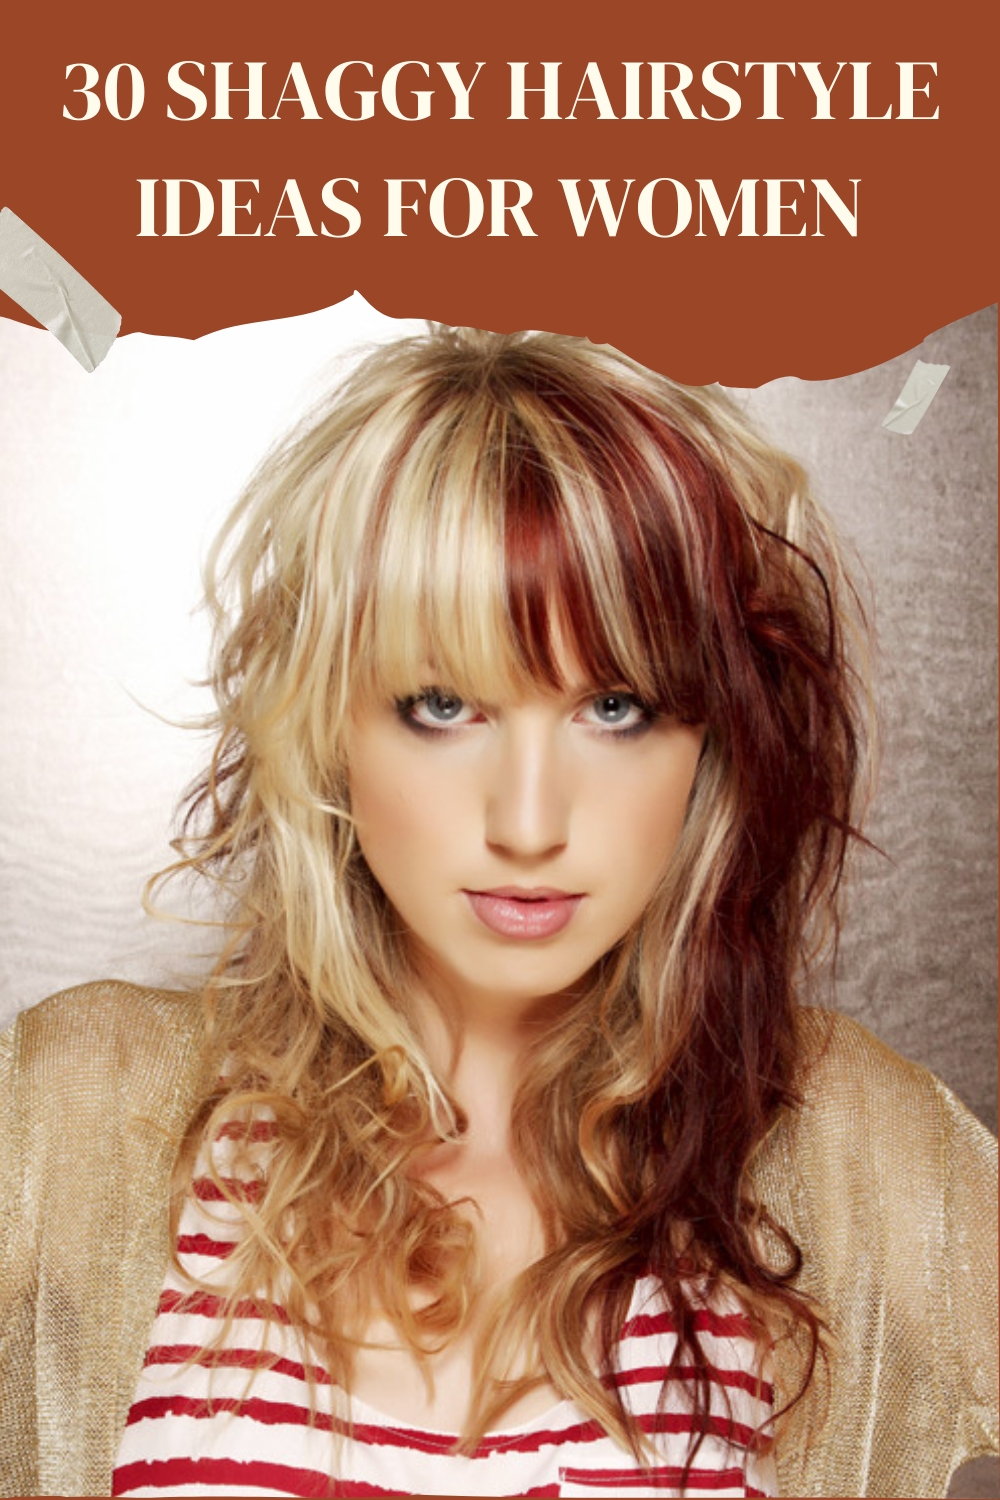 30 Shaggy Hairstyle Ideas for Women